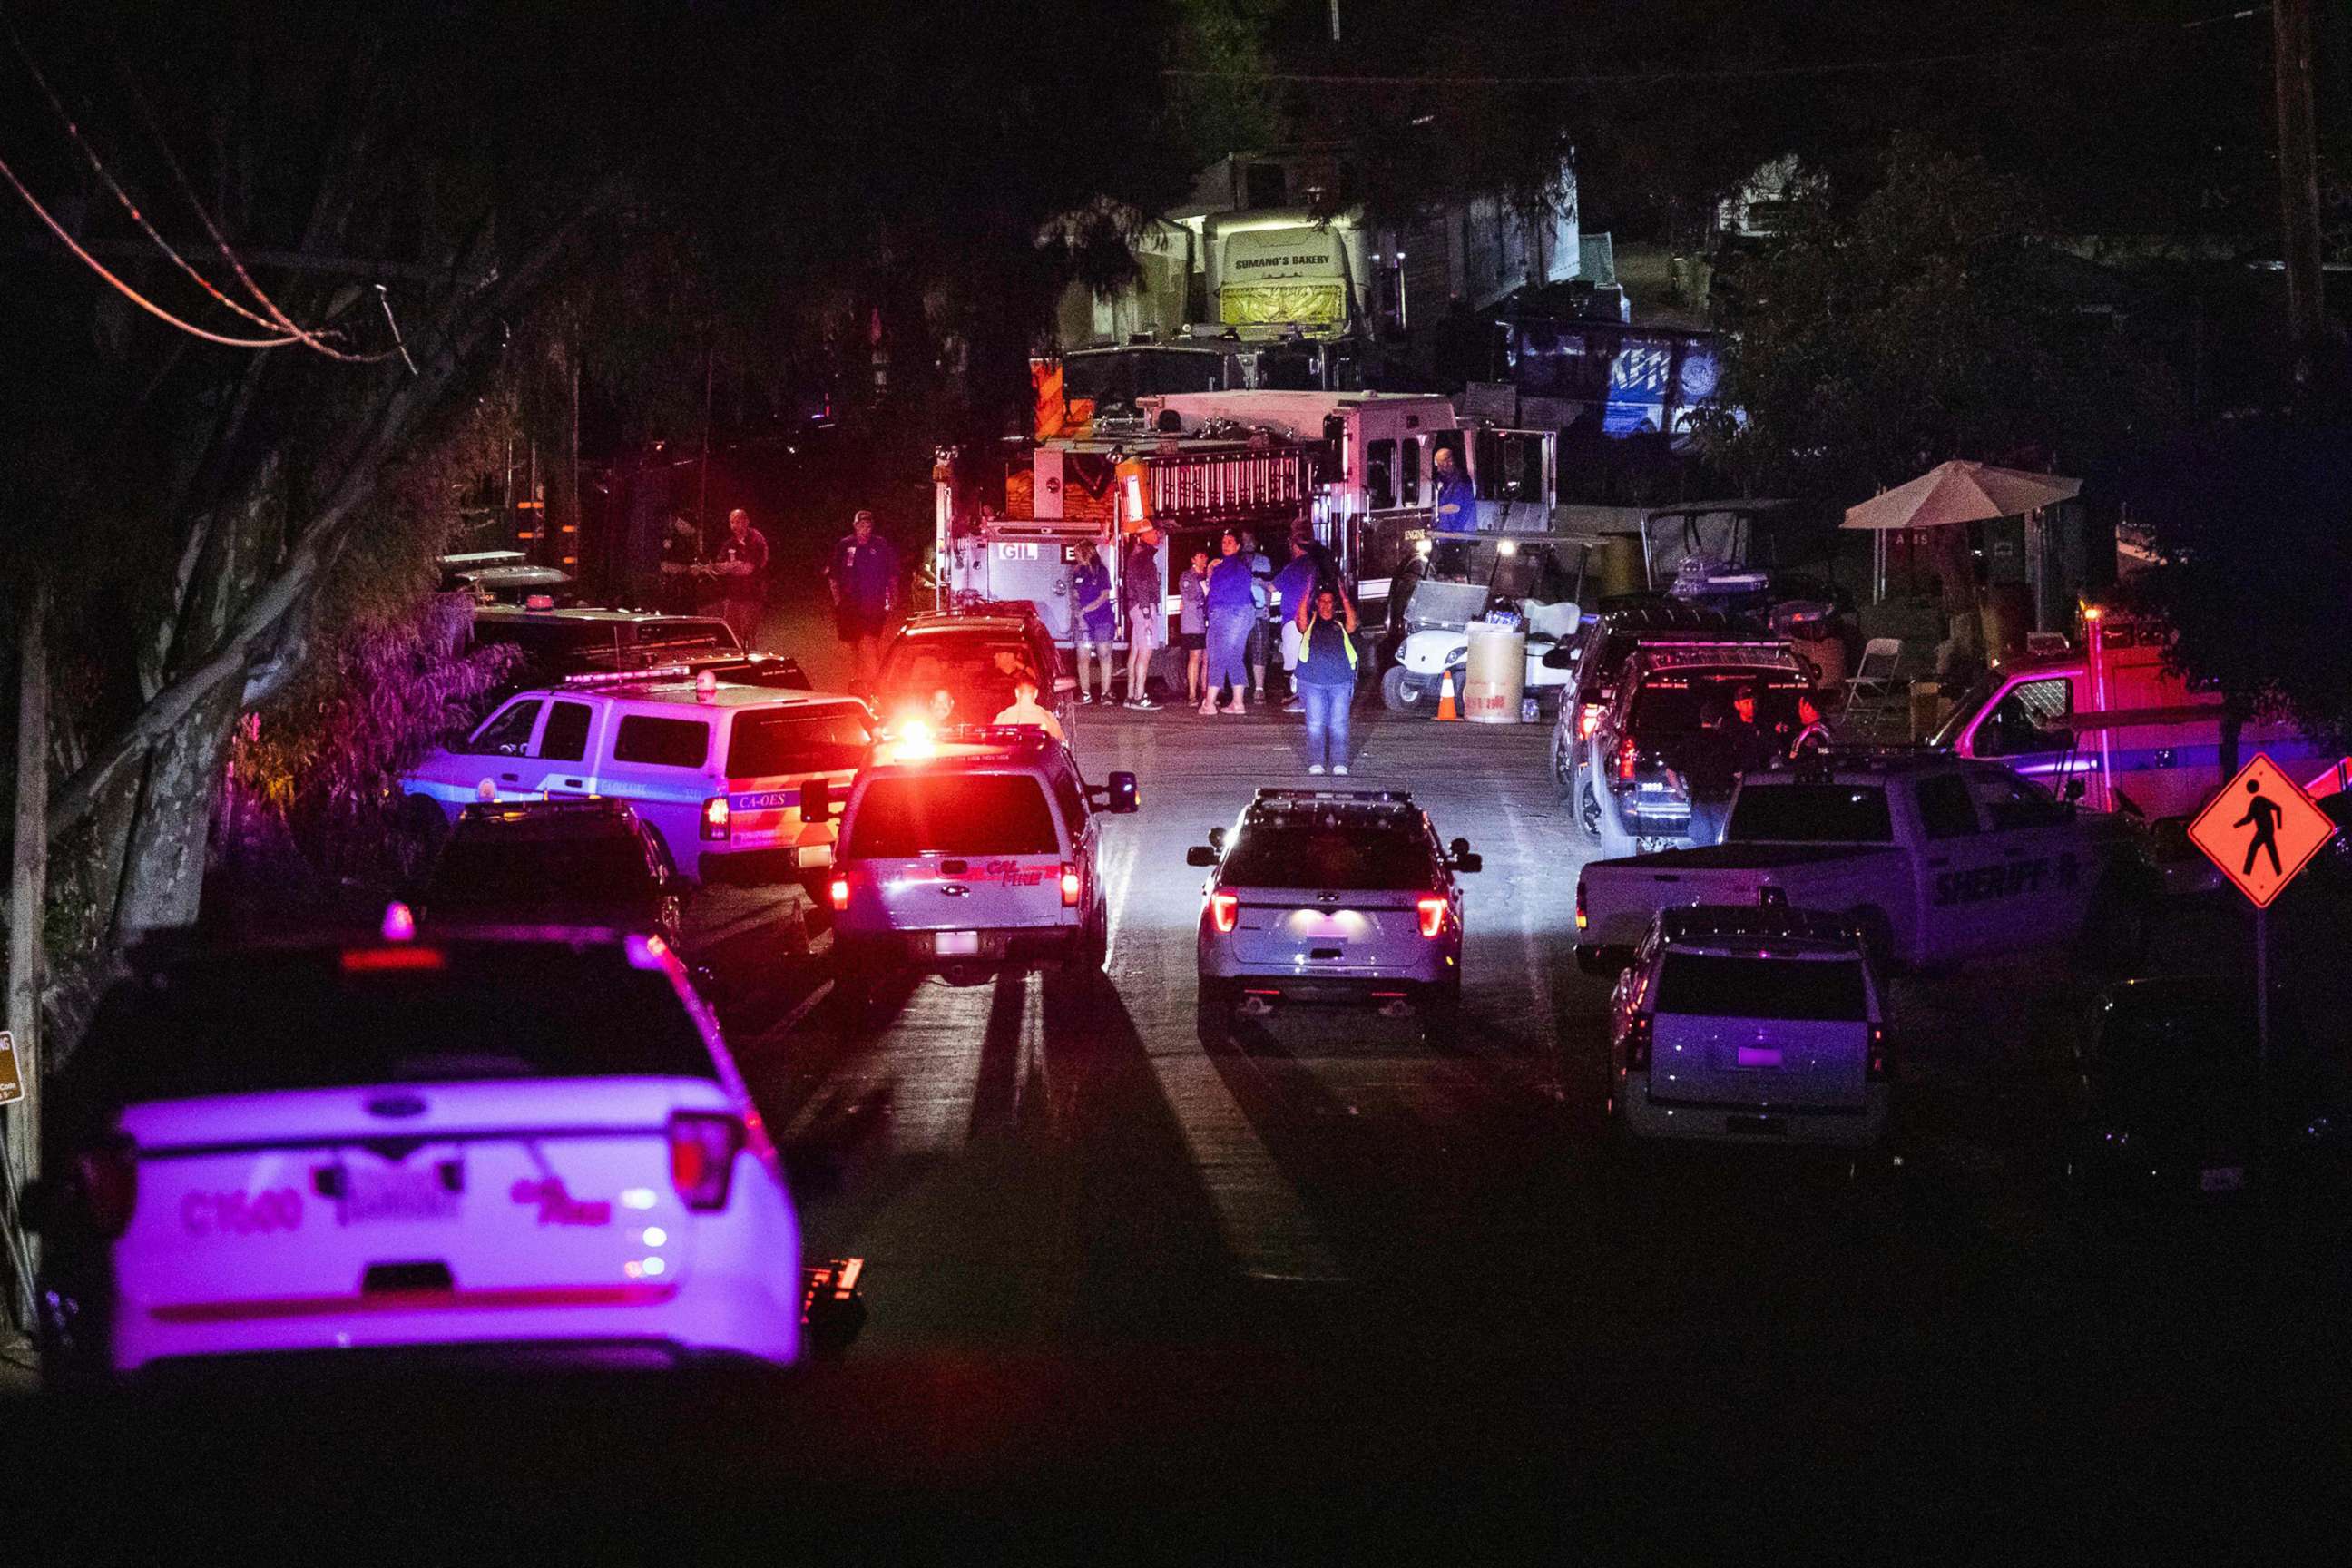 PHOTO: Police vehicles arrive on the scene of the investigation following a deadly shooting at the Gilroy Garlic Festival in Gilroy, 80 miles south of San Francisco, Calif., July 28, 2019.